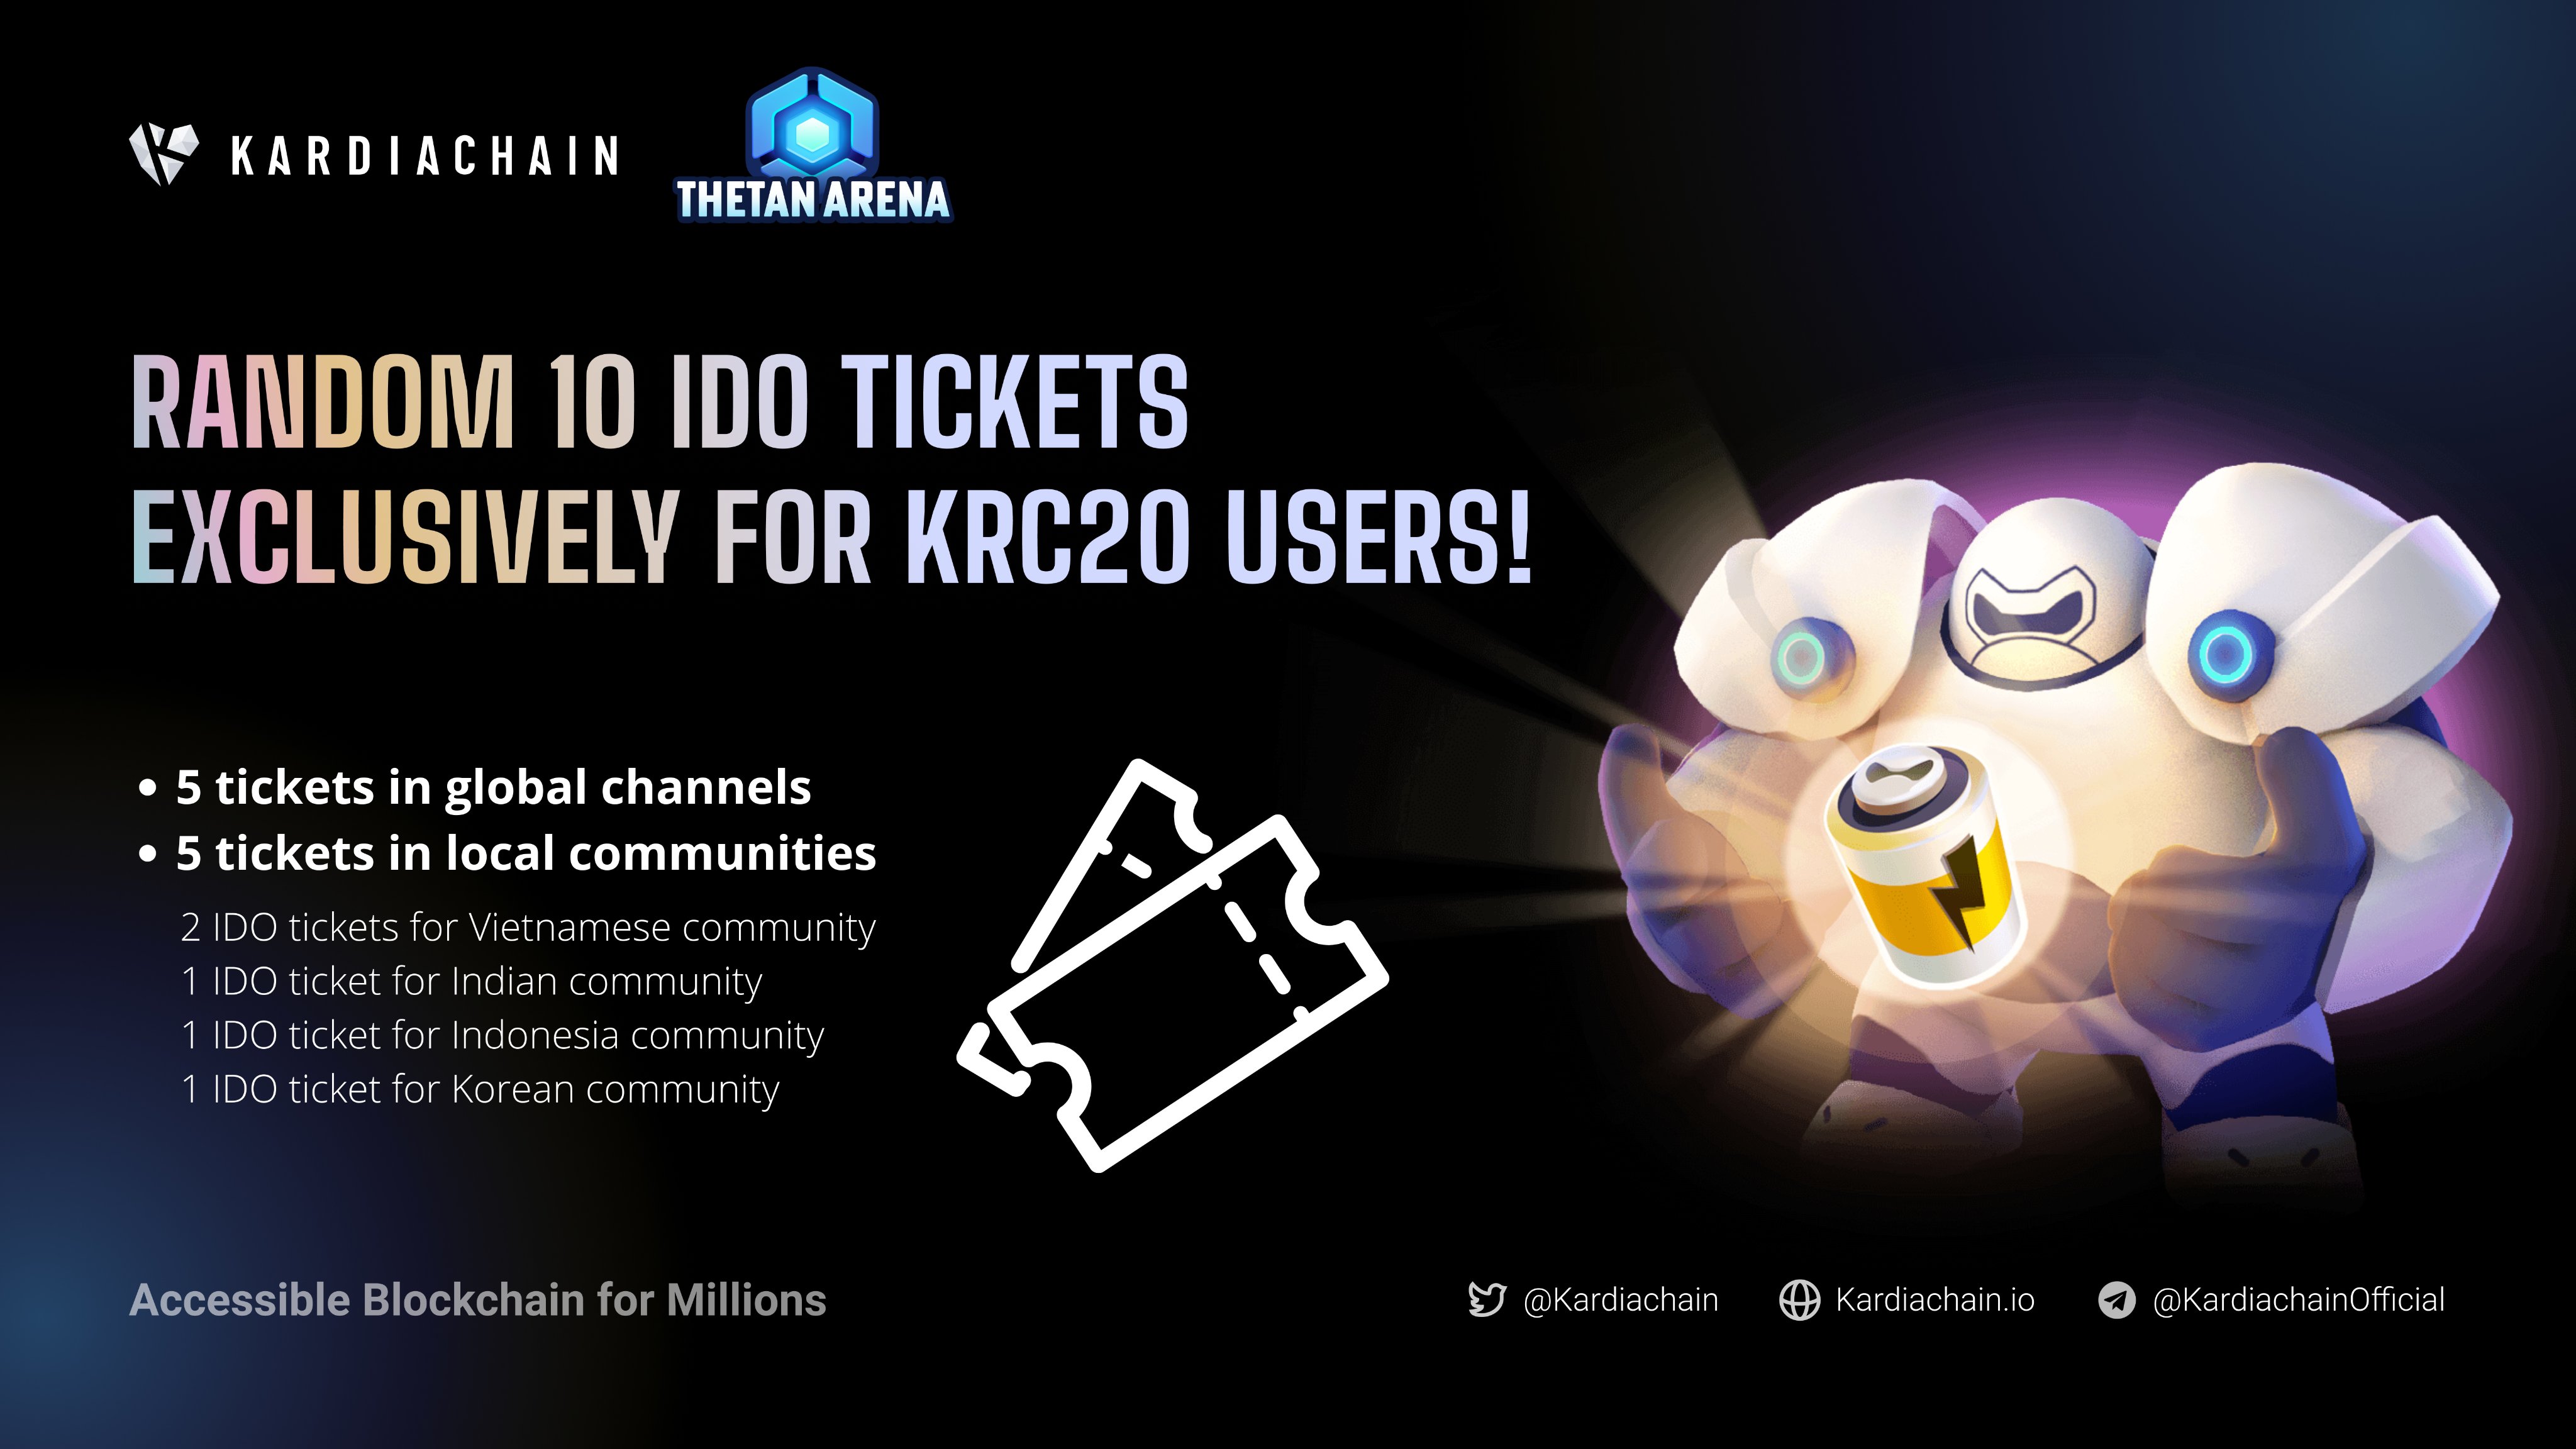 KardiaChain on "Following our momentum of Arena's #IDO hype, to celebrate our $KAI holders, we decided to host a minigame to up the pre-IDO time and treat our